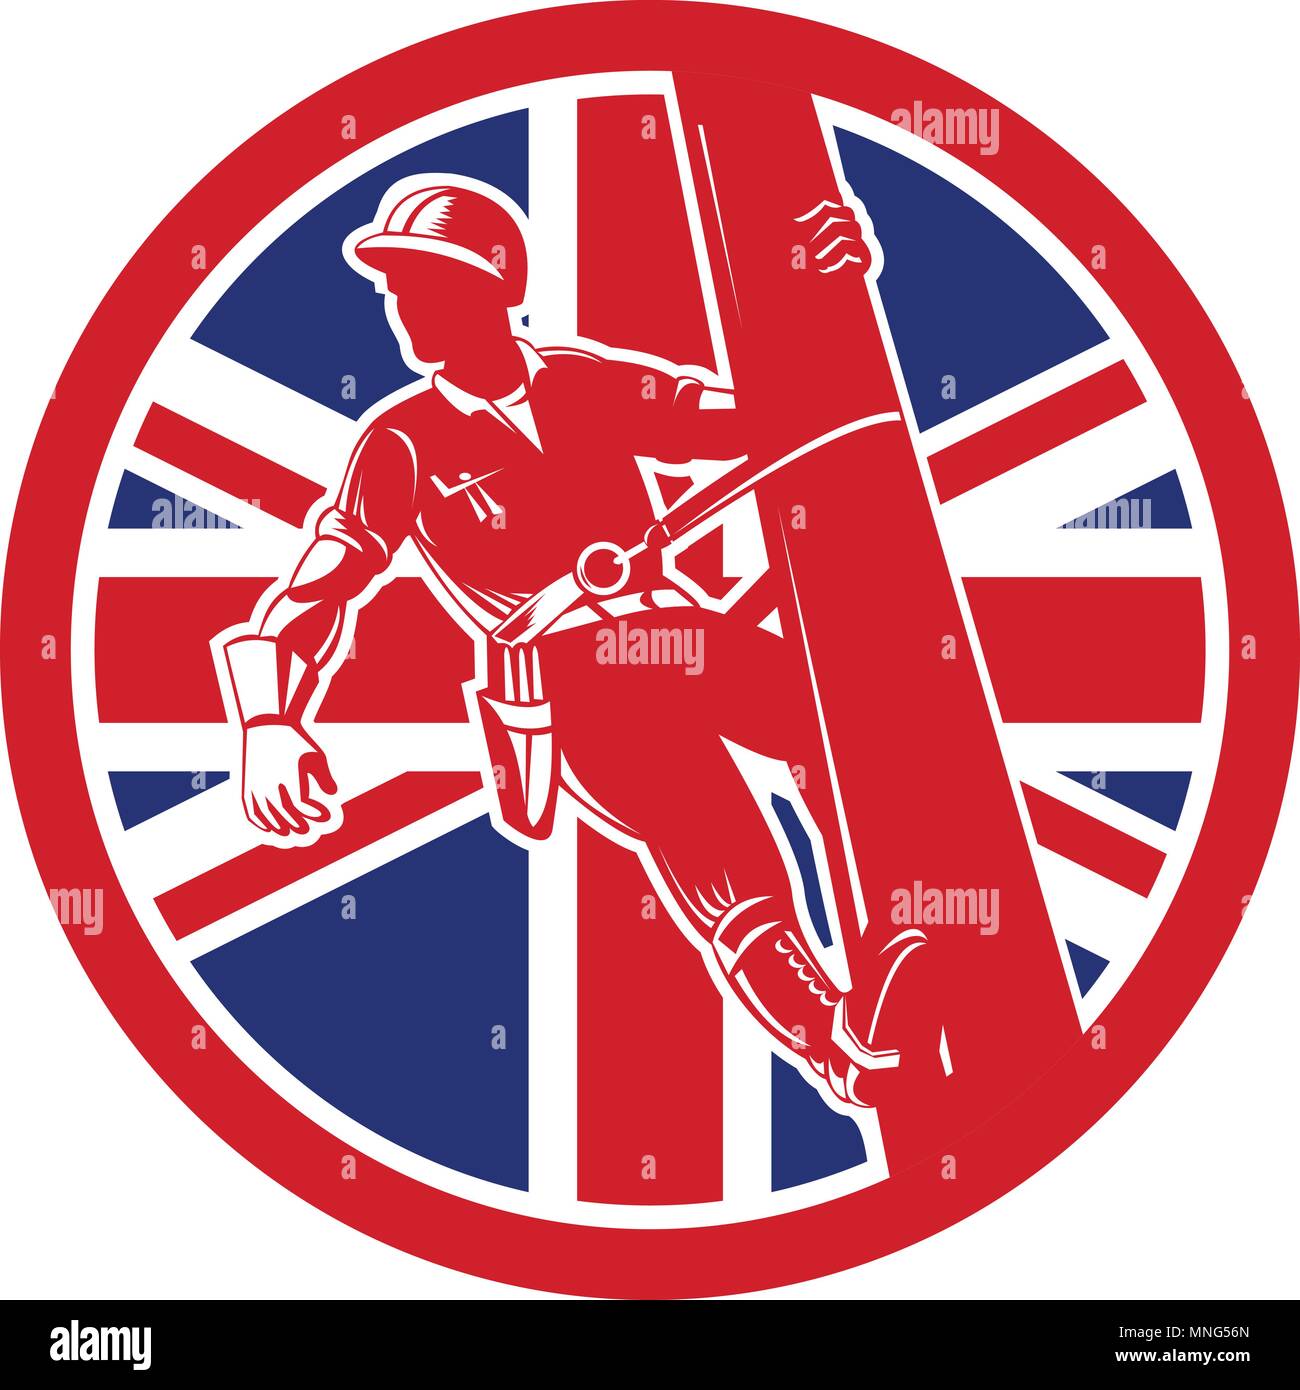 Icon retro style illustration of a British linesman or powerline worker on utility pole  with United Kingdom UK, Great Britain Union Jack flag set ins Stock Vector